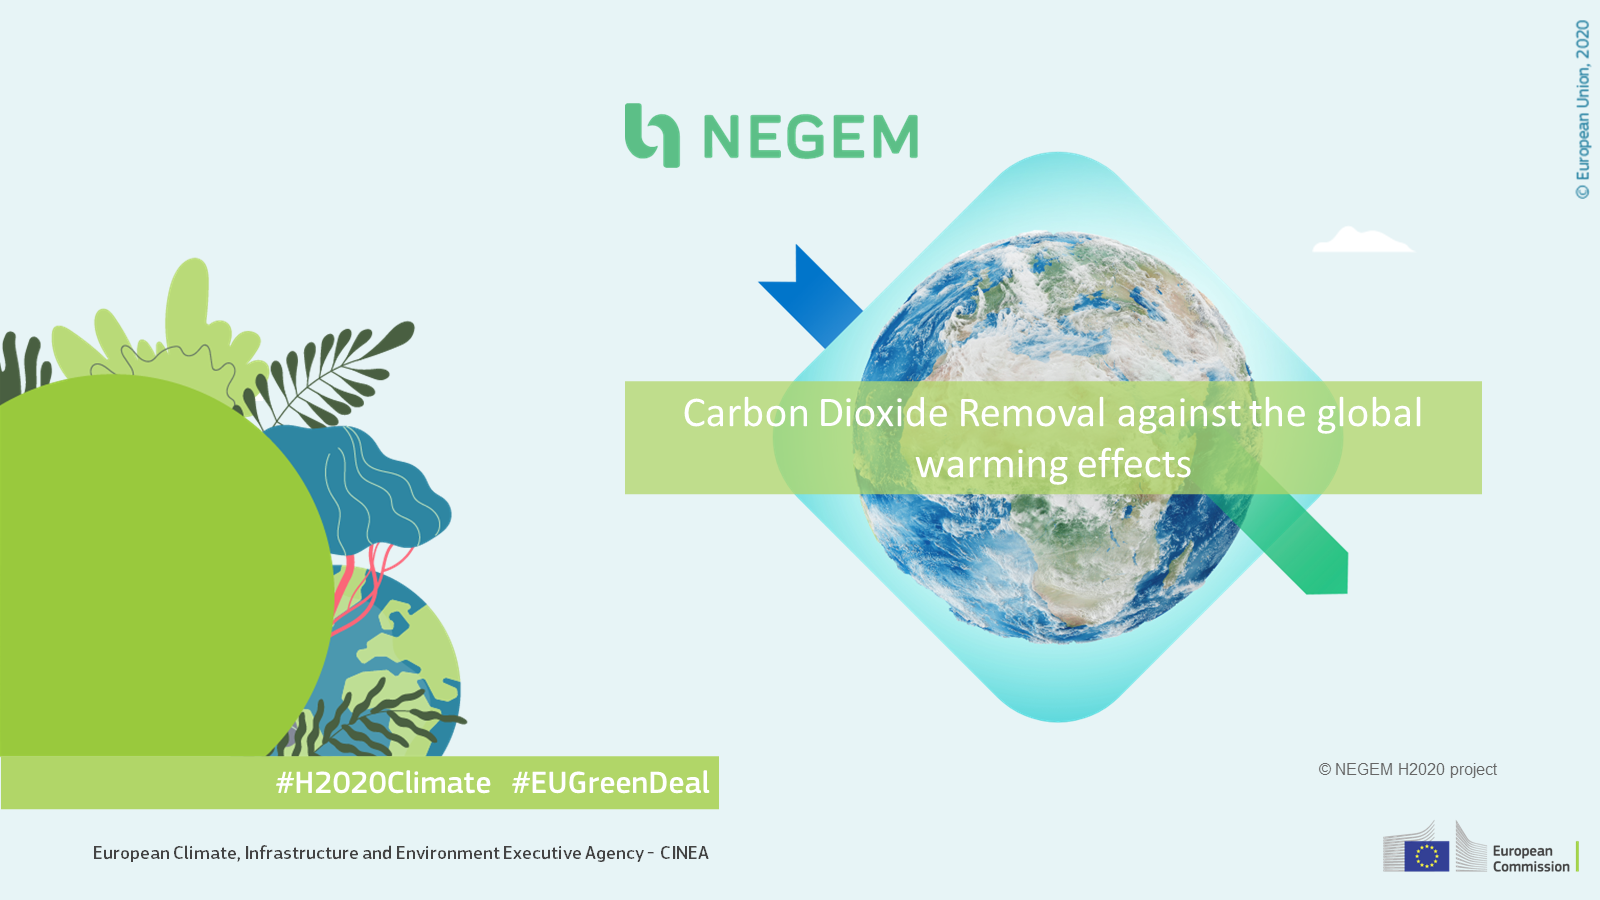 NEGEM project. Carbon Dioxide Removal against the global warming effects.